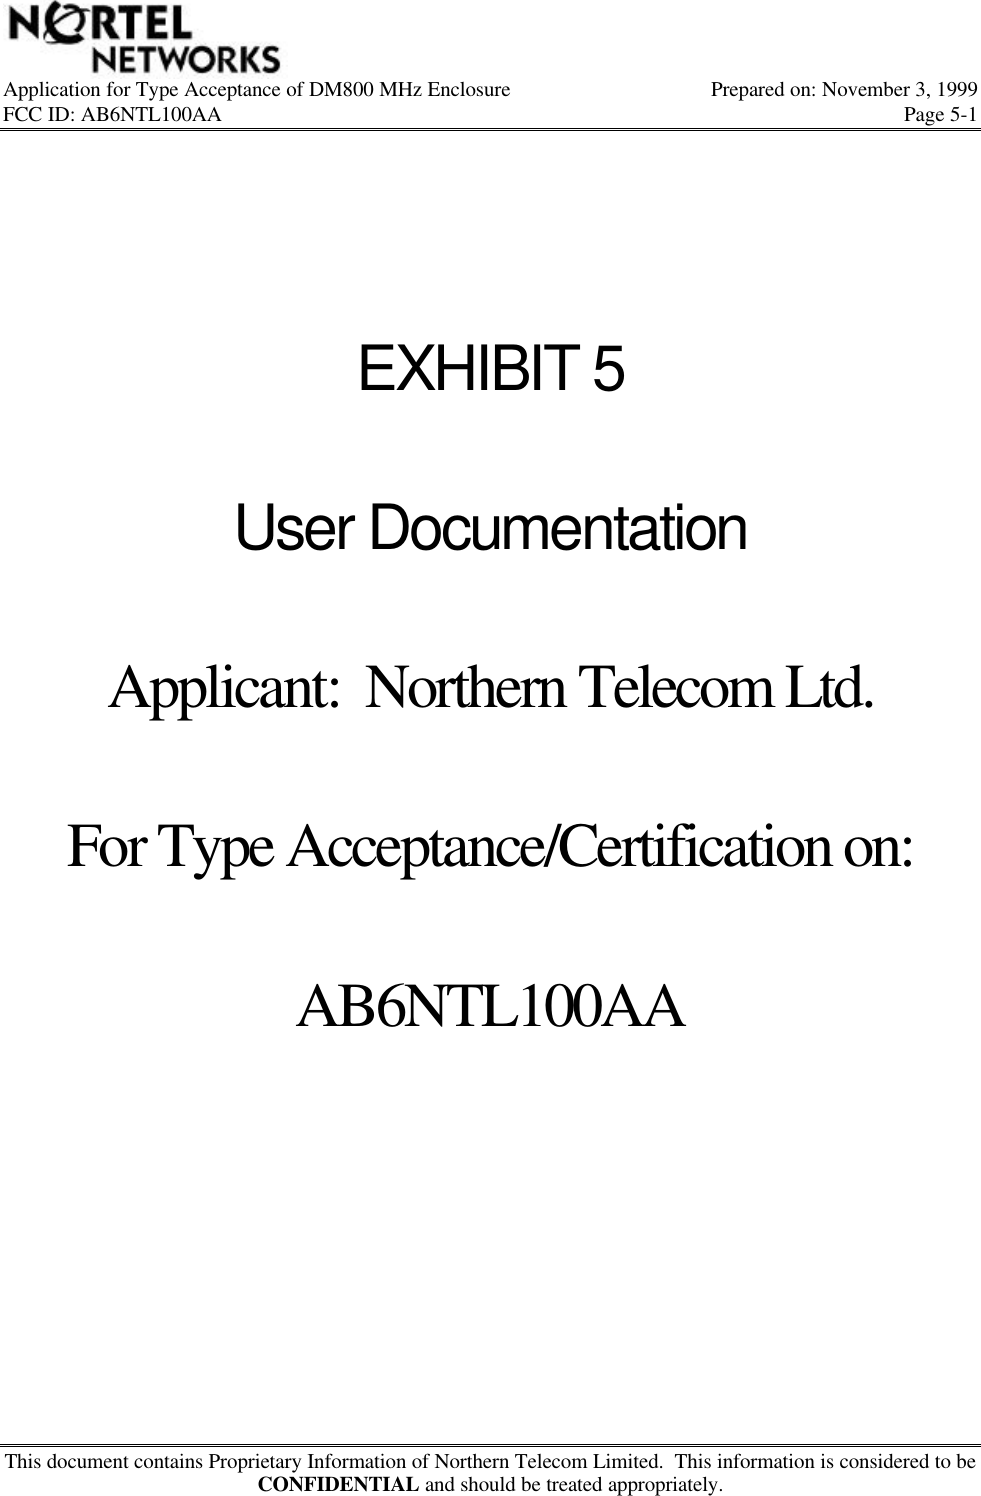 Application for Type Acceptance of DM800 MHz Enclosure Prepared on: November 3, 1999FCC ID: AB6NTL100AA Page 5-1This document contains Proprietary Information of Northern Telecom Limited.  This information is considered to beCONFIDENTIAL and should be treated appropriately.EXHIBIT 5User DocumentationApplicant:  Northern Telecom Ltd.For Type Acceptance/Certification on:AB6NTL100AA